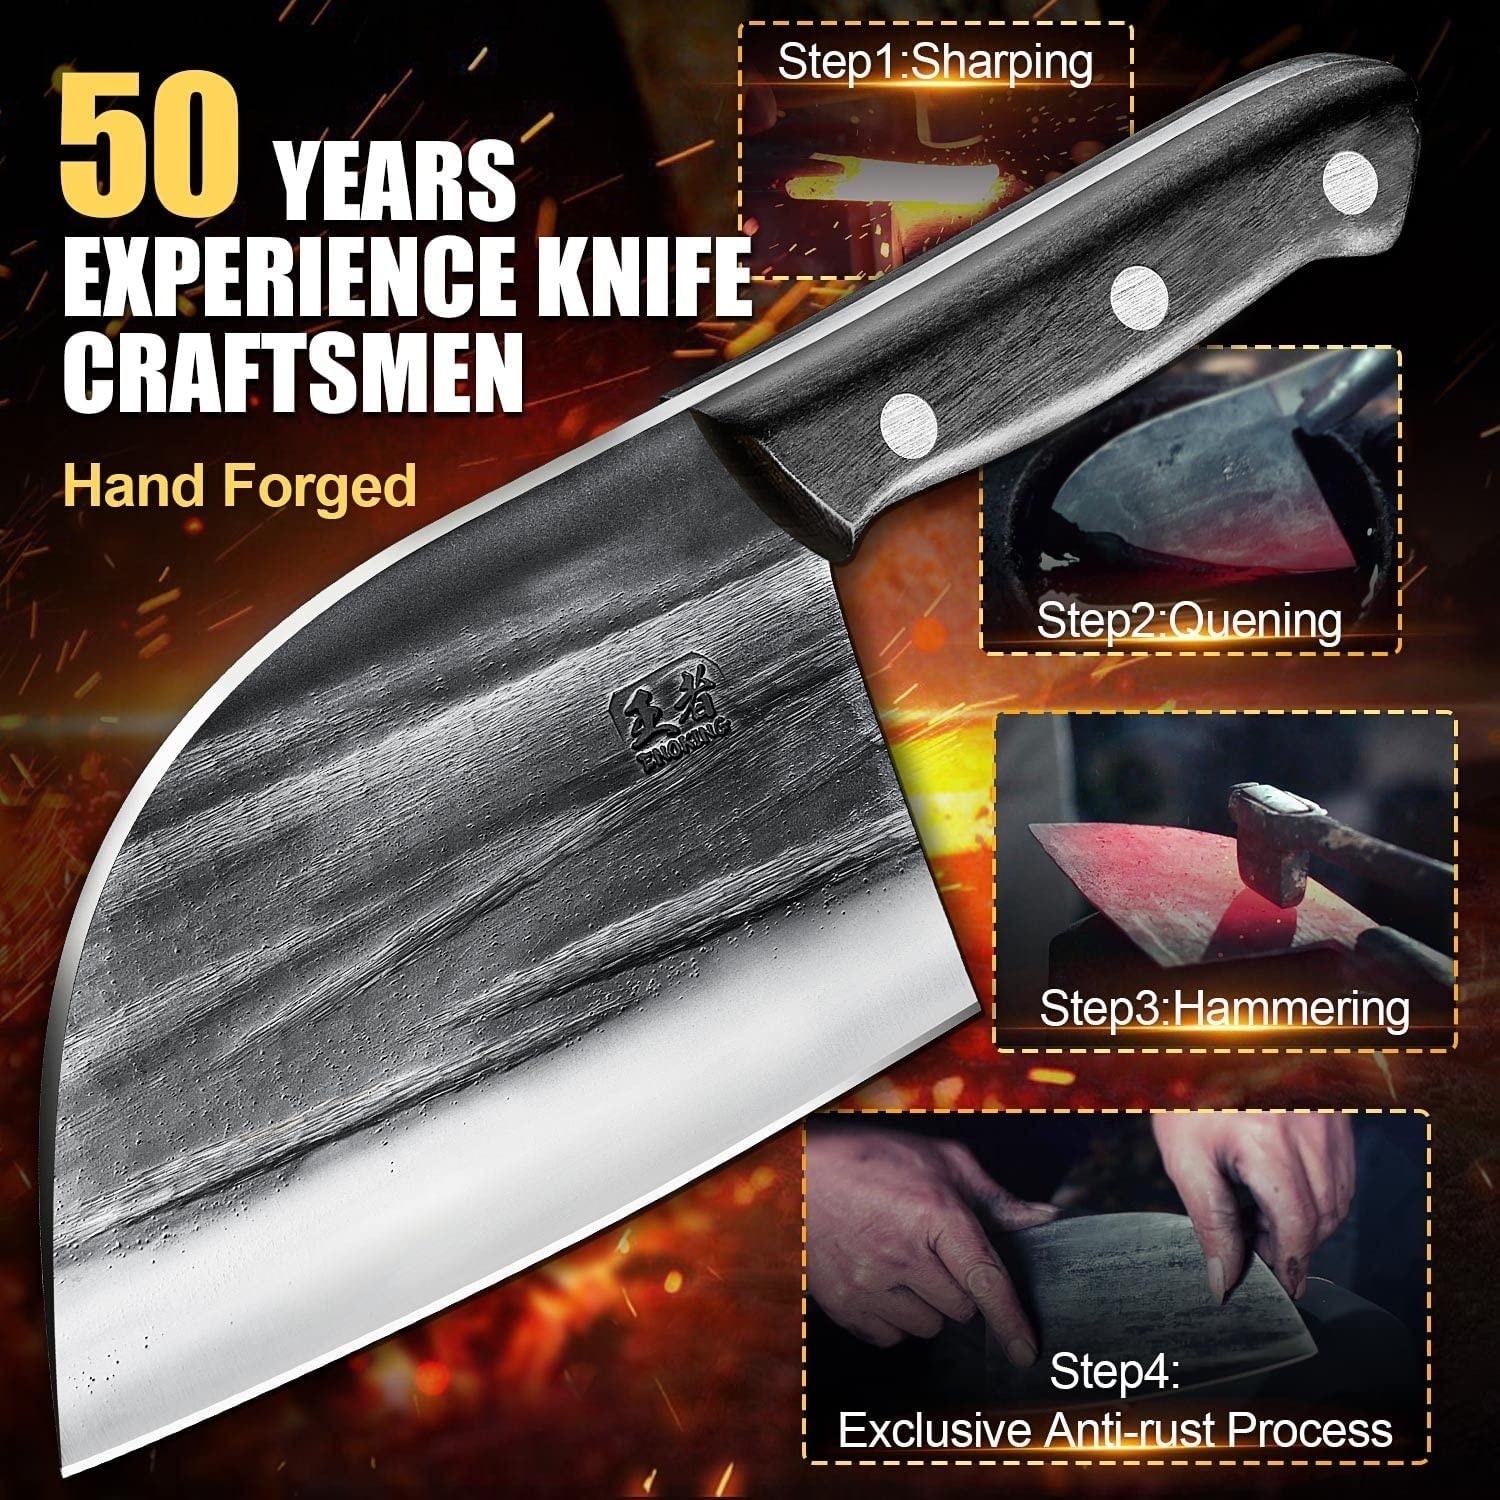 https://ak1.ostkcdn.com/images/products/is/images/direct/11fb0e6ff1a078f3d04e04bc148af96de2066e03/ENOKING-Meat-Cleaver-Knife-%286.7%22-Handmade%29.jpg